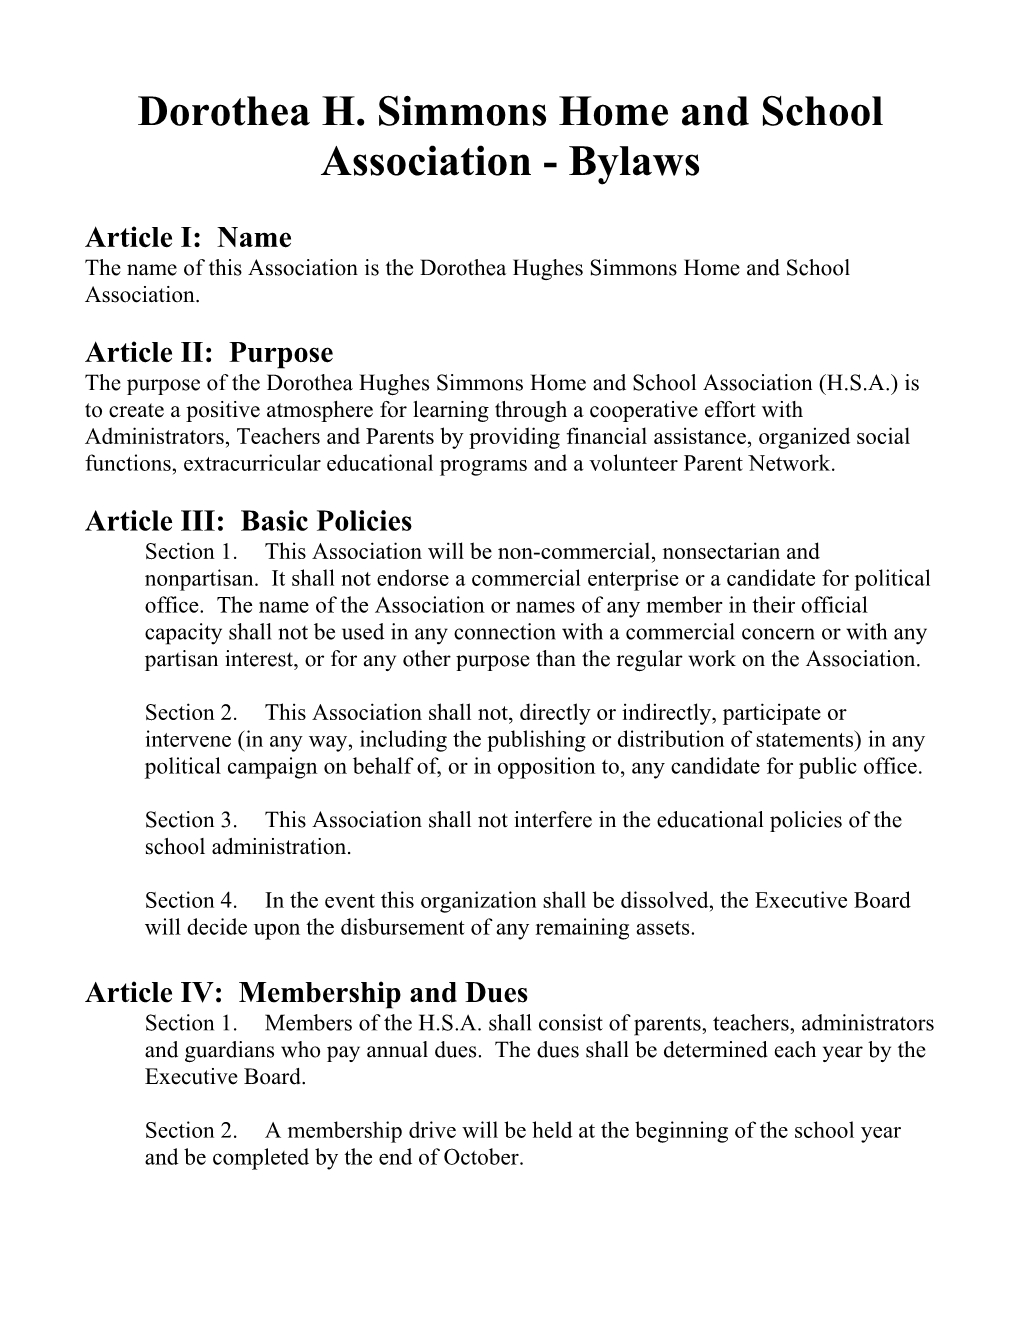 Dorothea H. Simmons Home and School Association - Bylaws